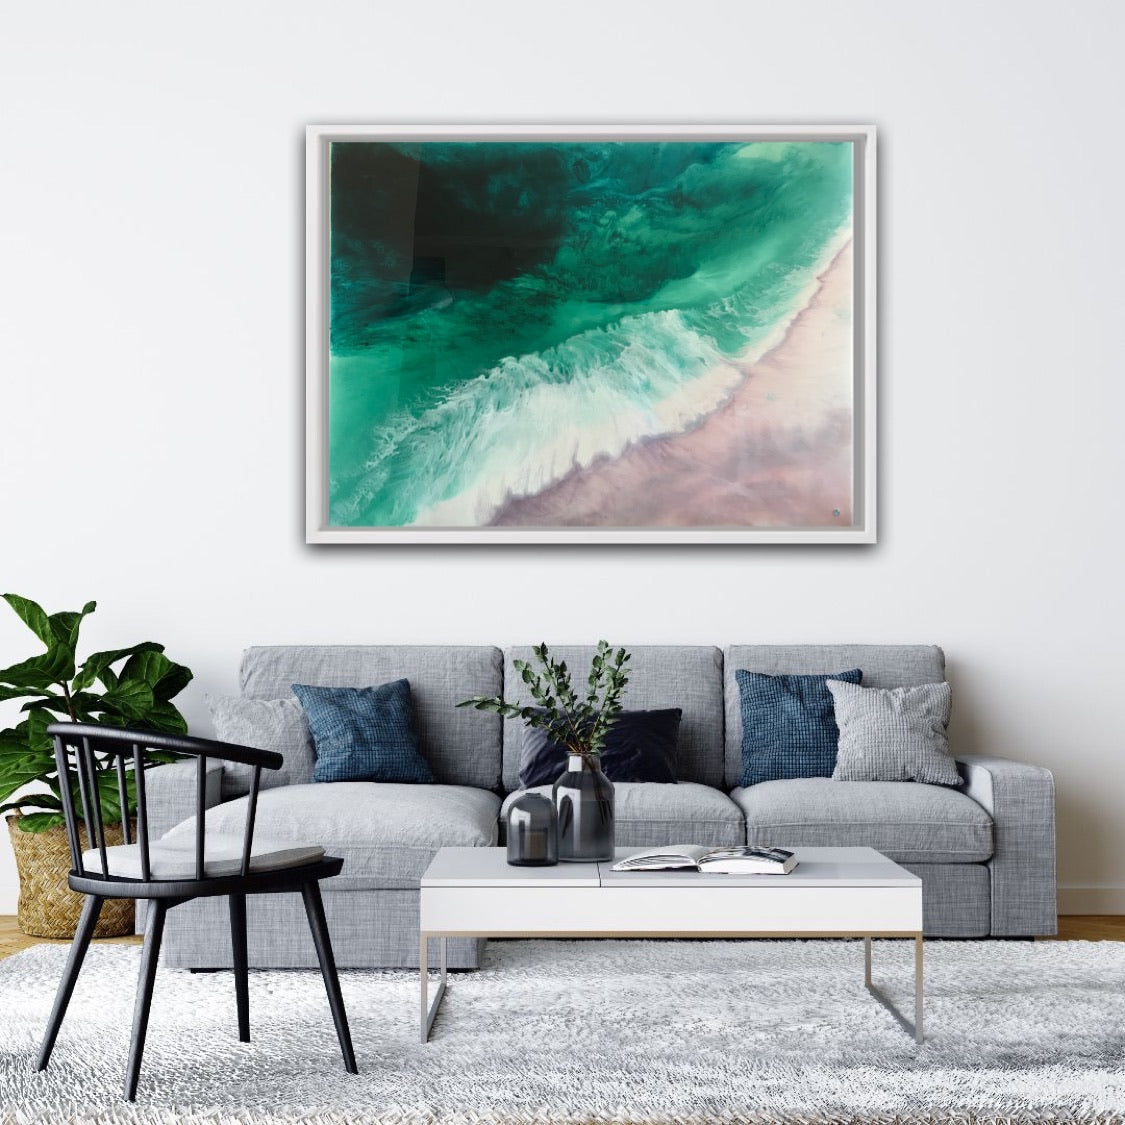 Teal Abstract Artwork. Ocean Blue. Bronte Undercurrent. Antuanelle 5 Undercurrent. Green and Pink Abstract. Original 90x120 cm